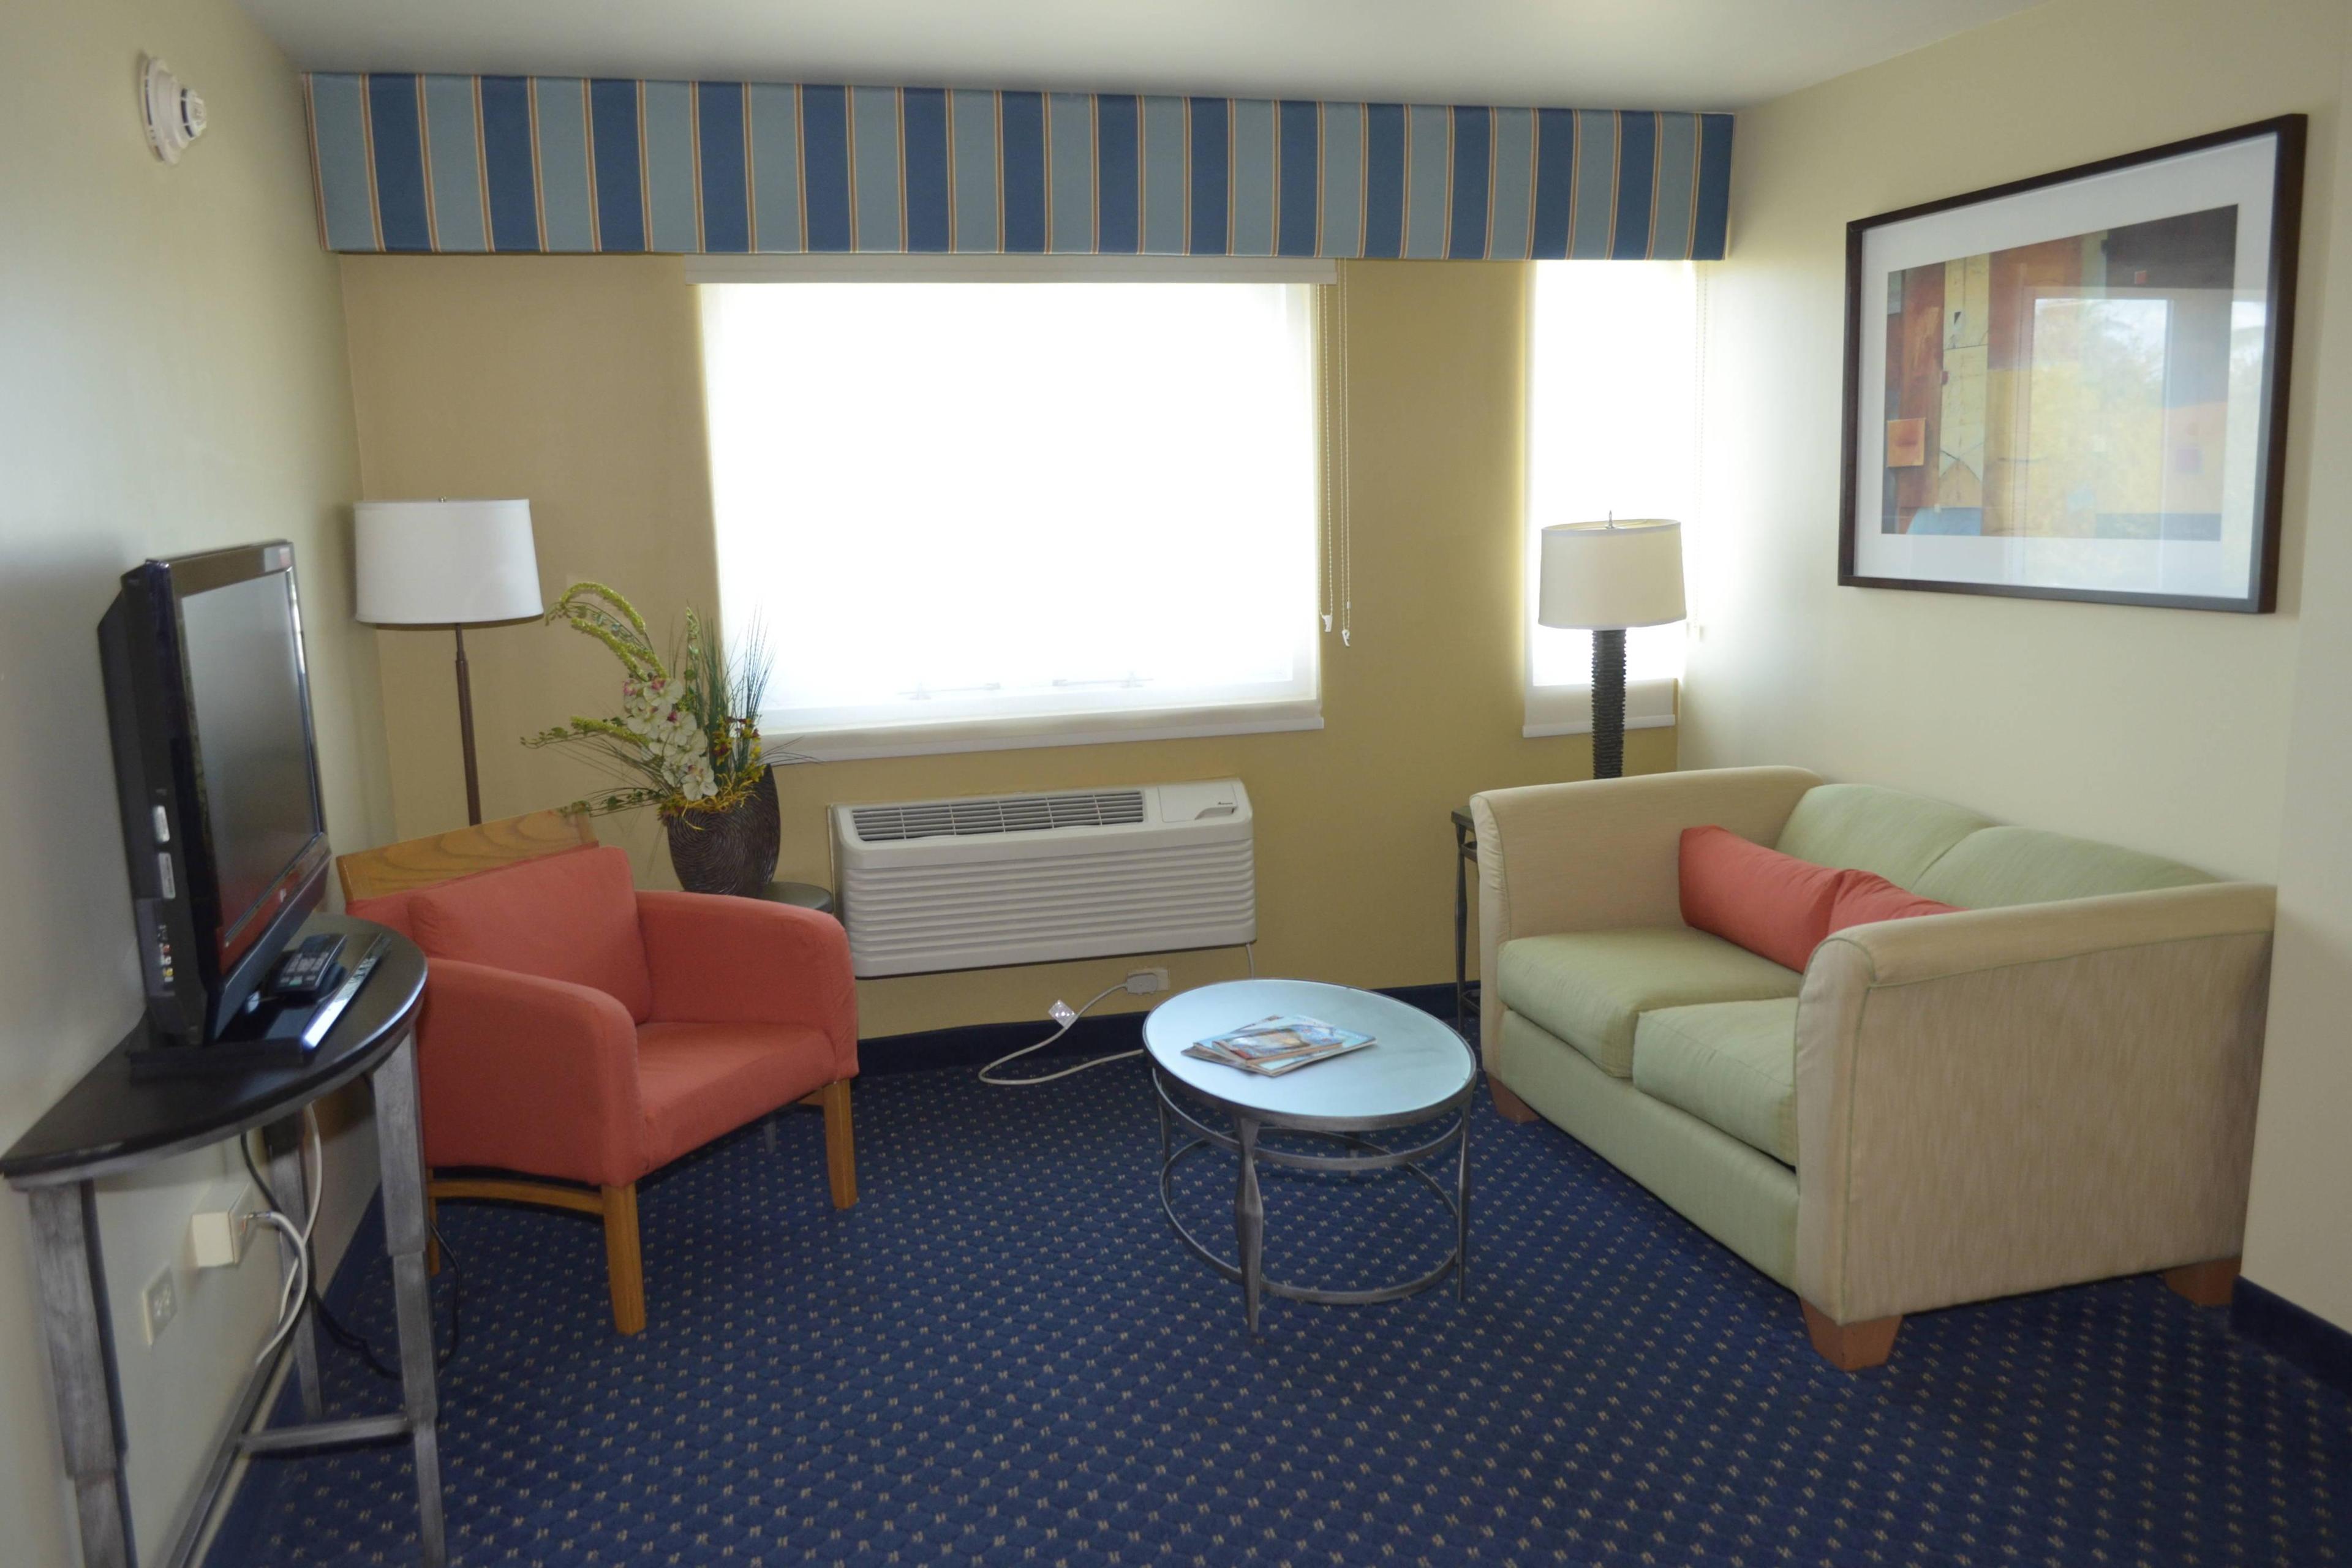 Our comfortable Junior Suite living room has a seating area with a full size bed, a/c, cable TV with HBO and free wifi.